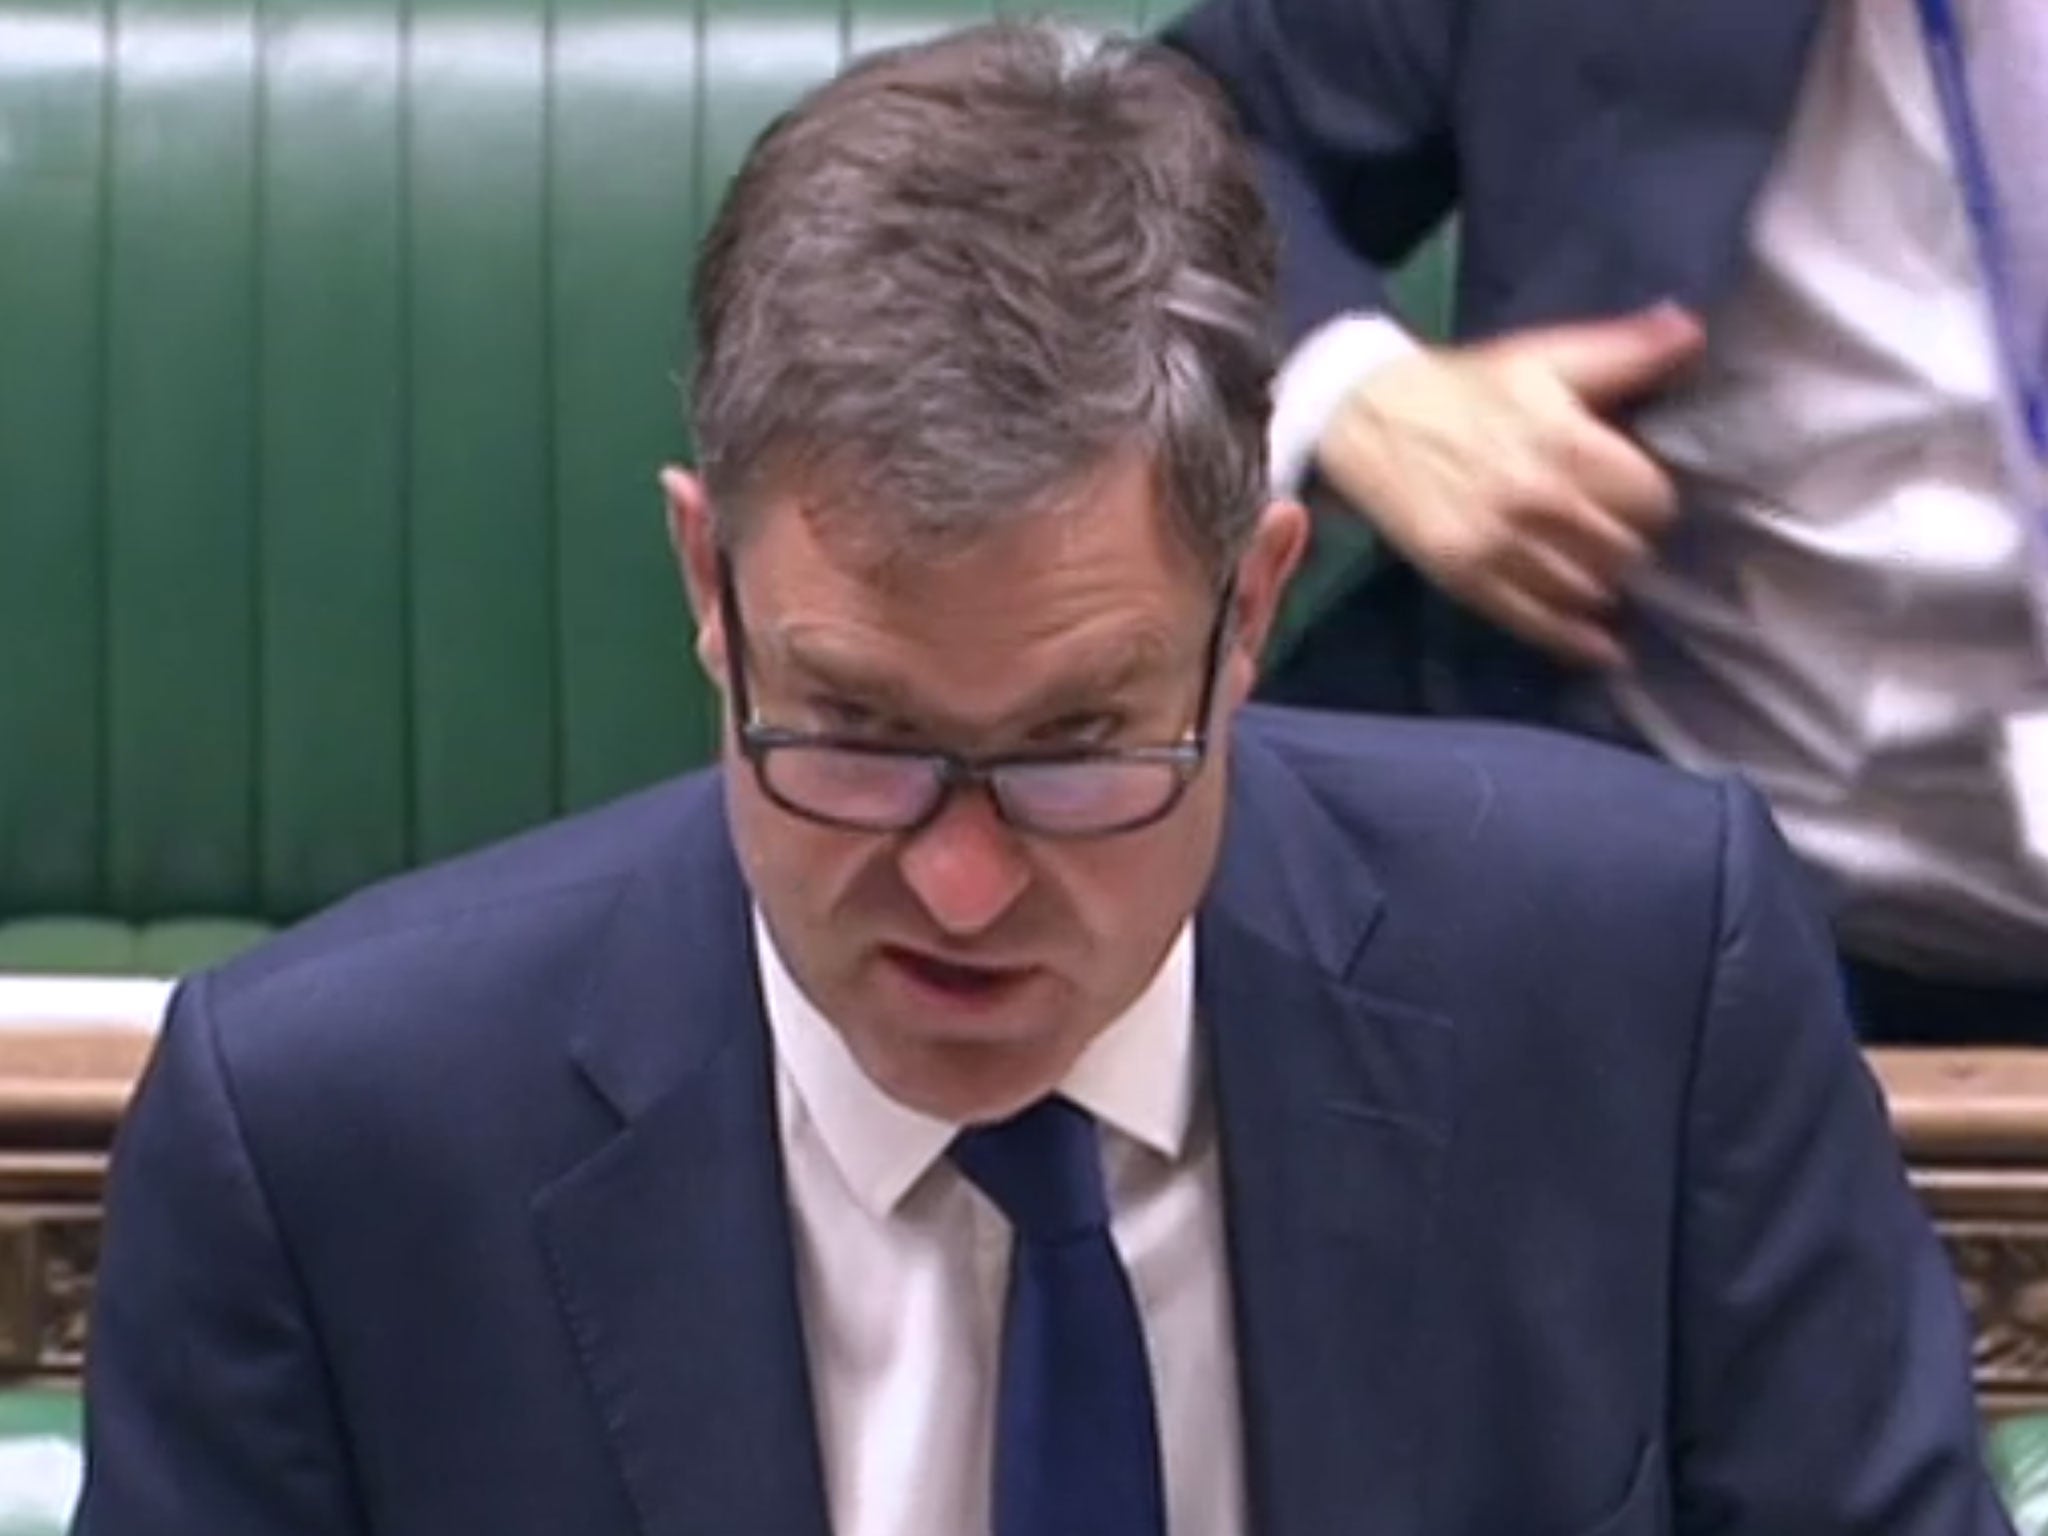 David Gauke told the Commons the government would carry on with the rollout of Universal Credit